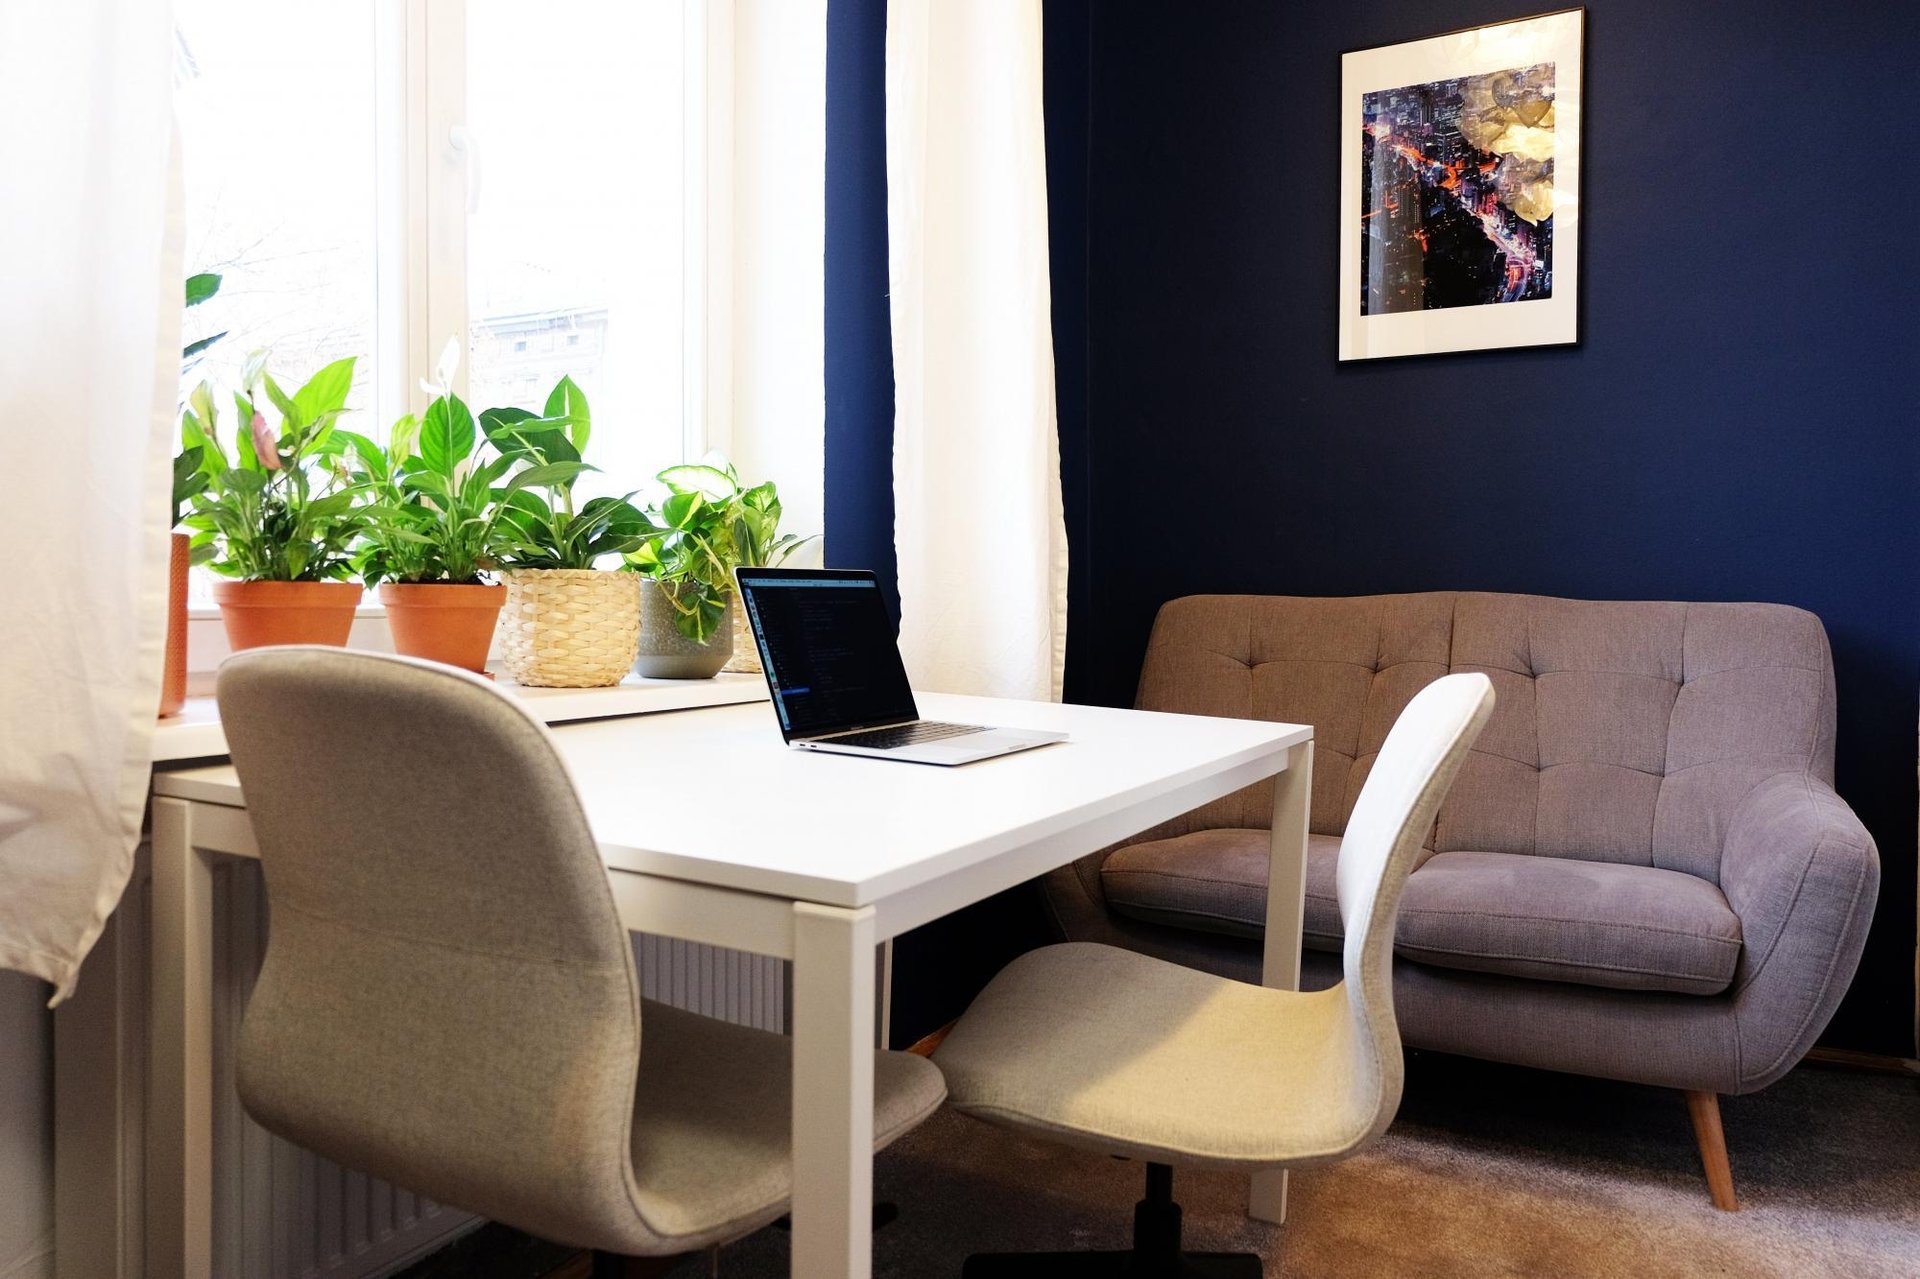 Office for 18 pers. in Kalafiornia Coworking & Offices